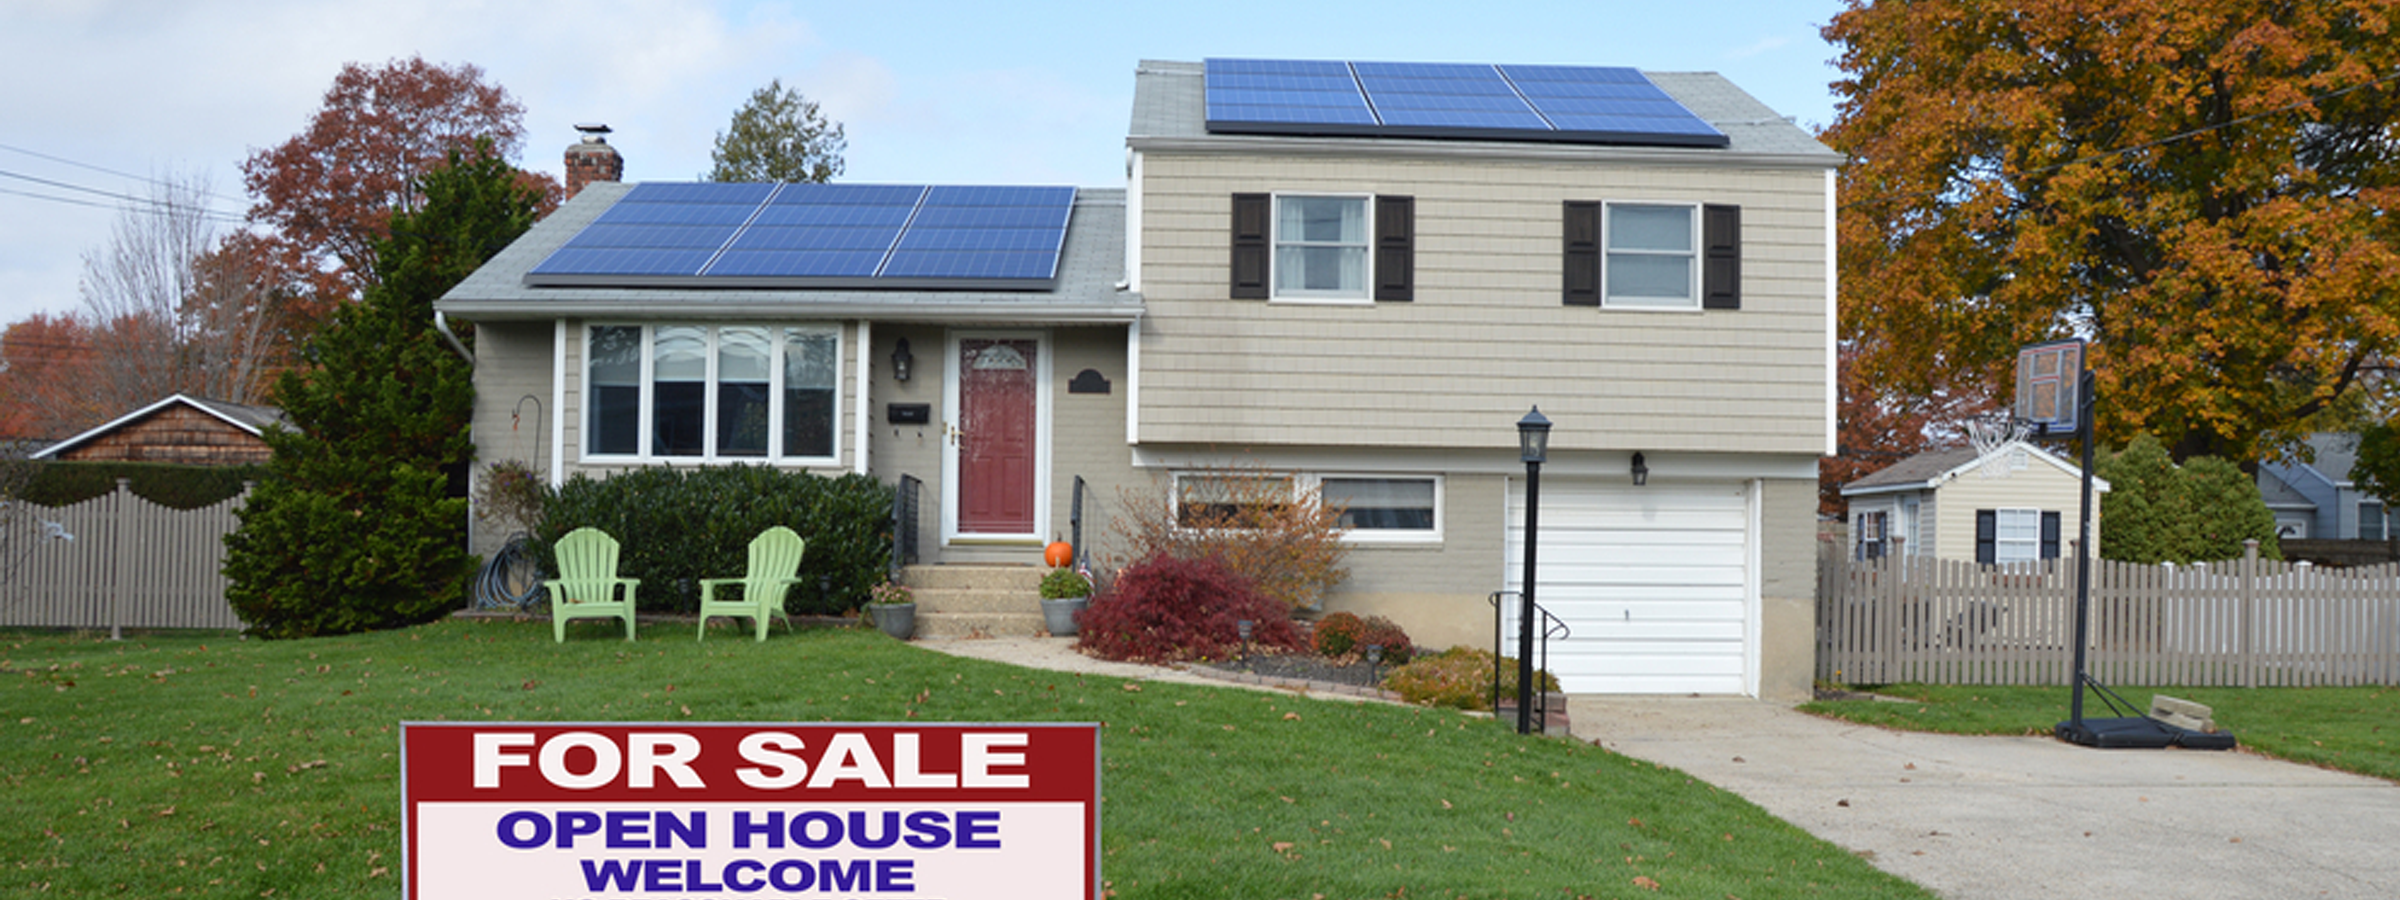 Do Solar Panels Increase the Value of a Home?